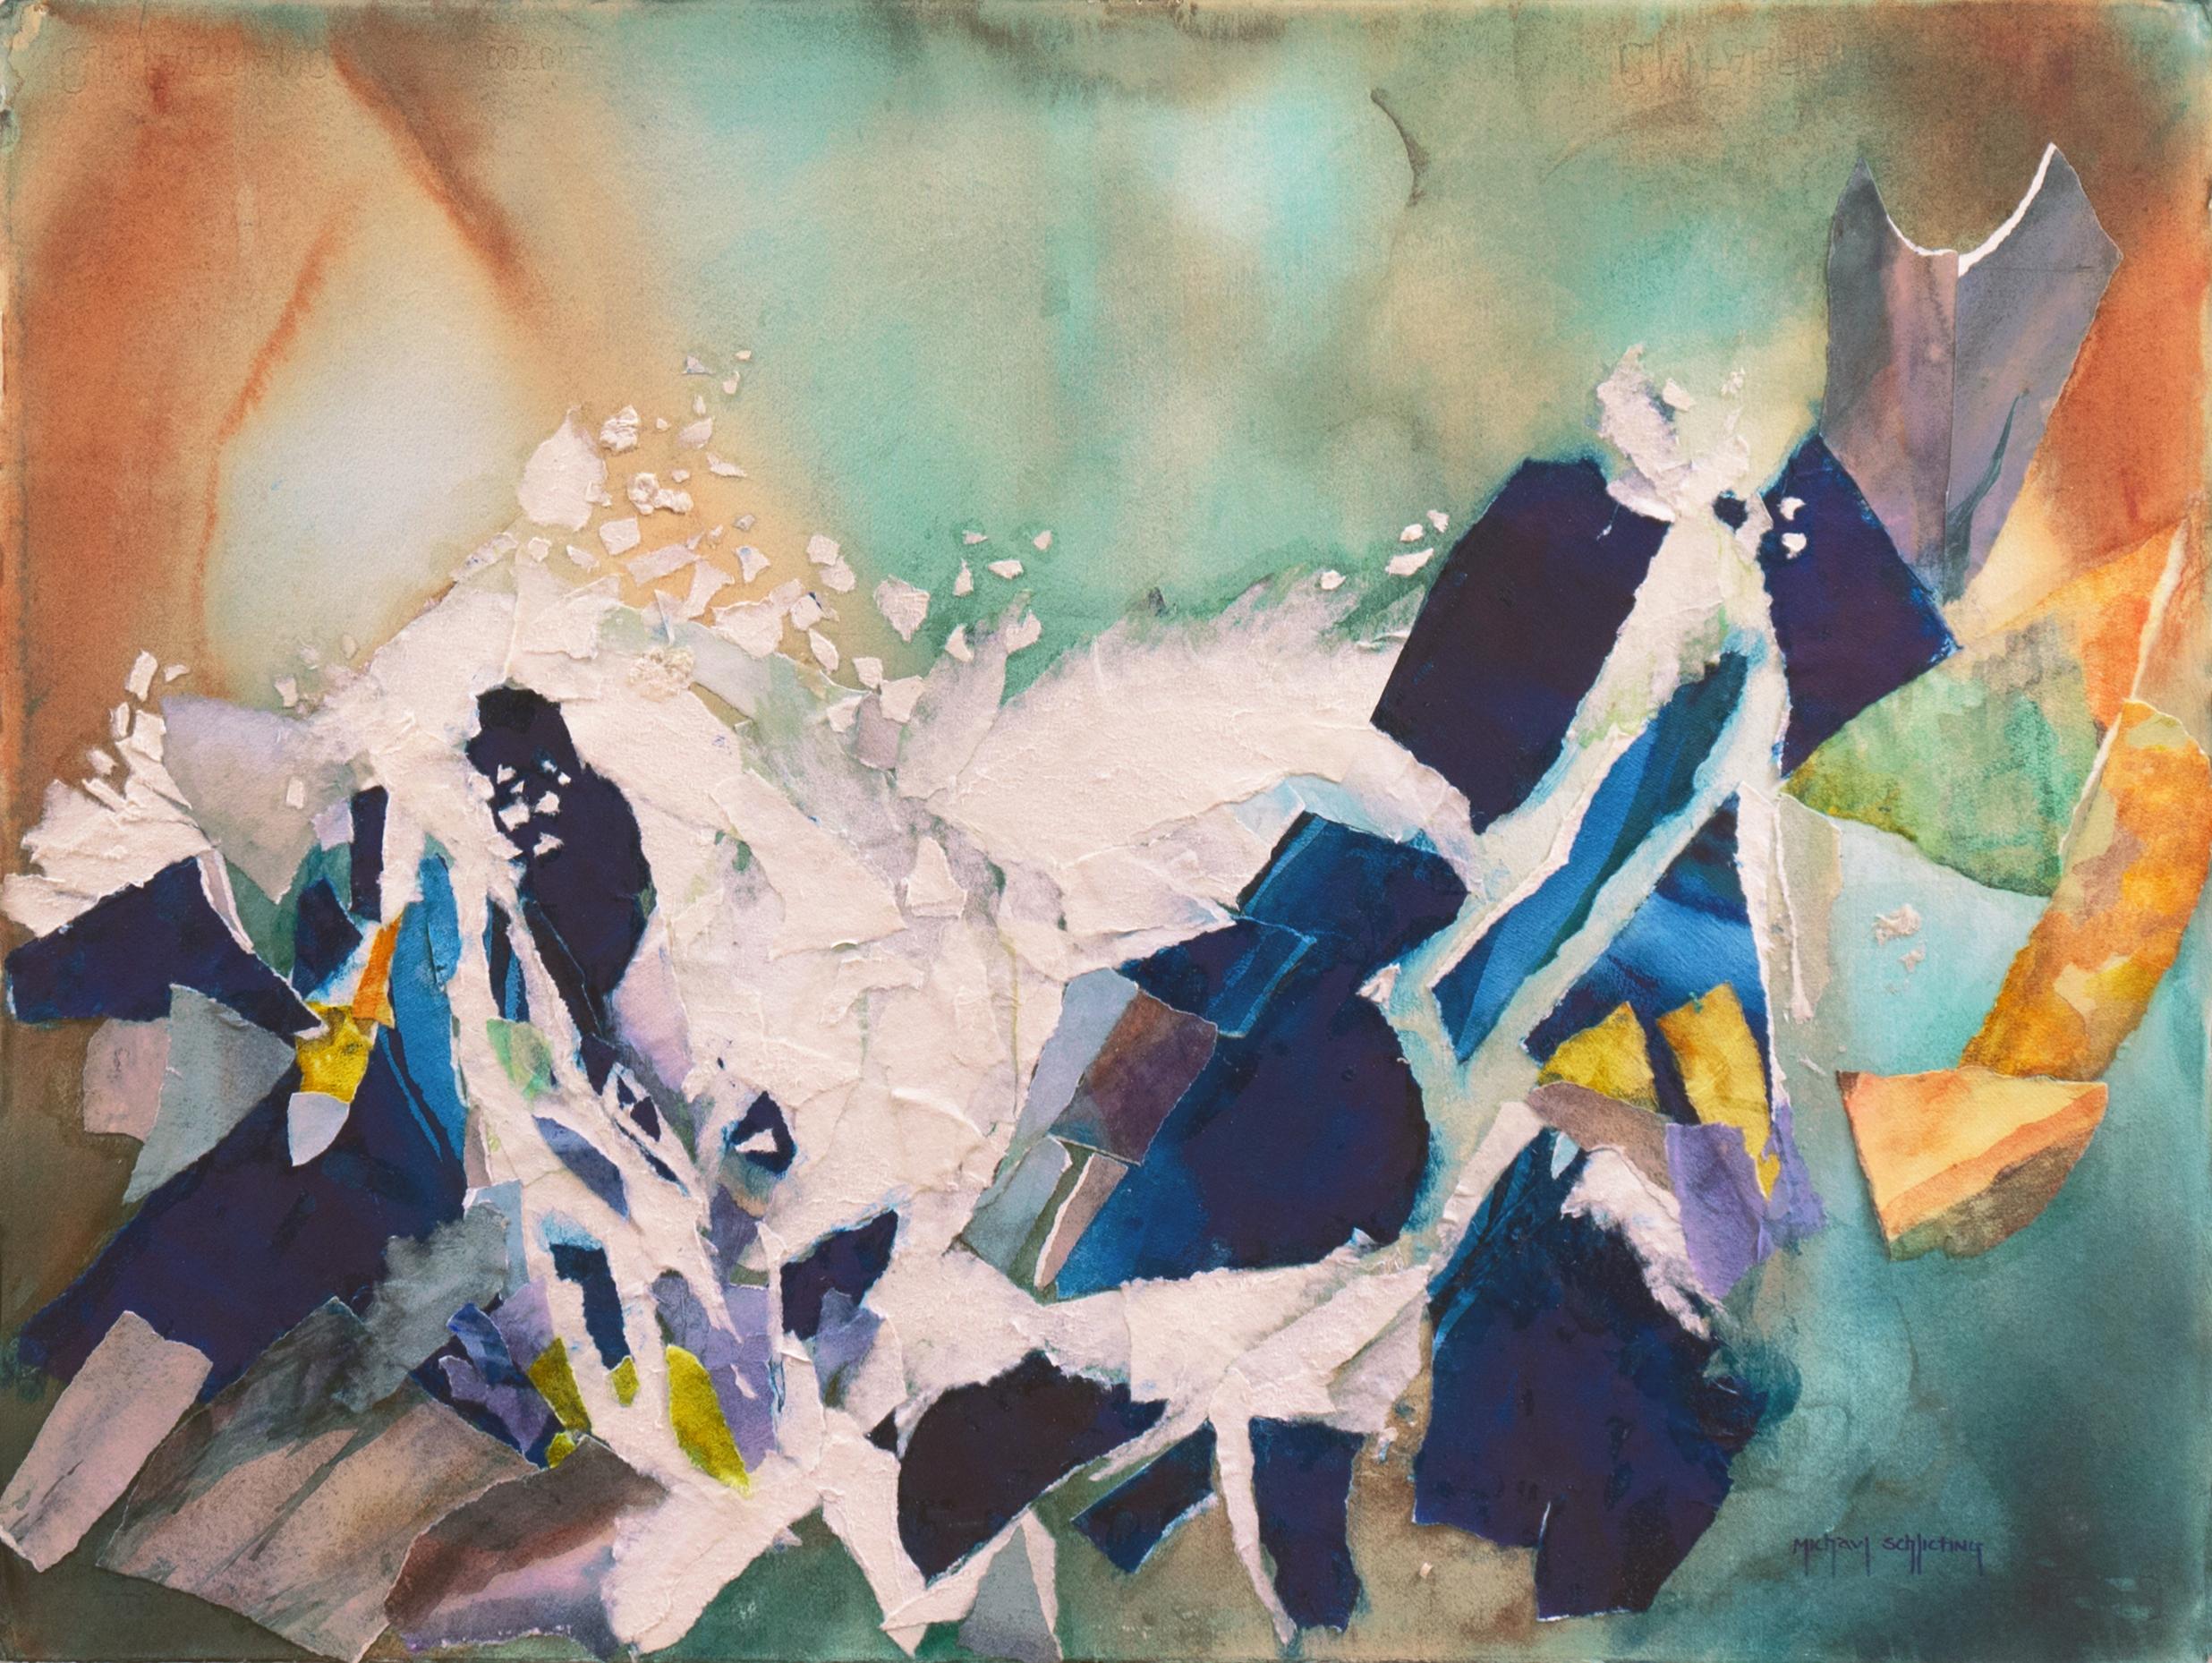 Michael Schlicting Landscape Art – „Breaking Waves“, National Watercolor Society, American Watercolor Society